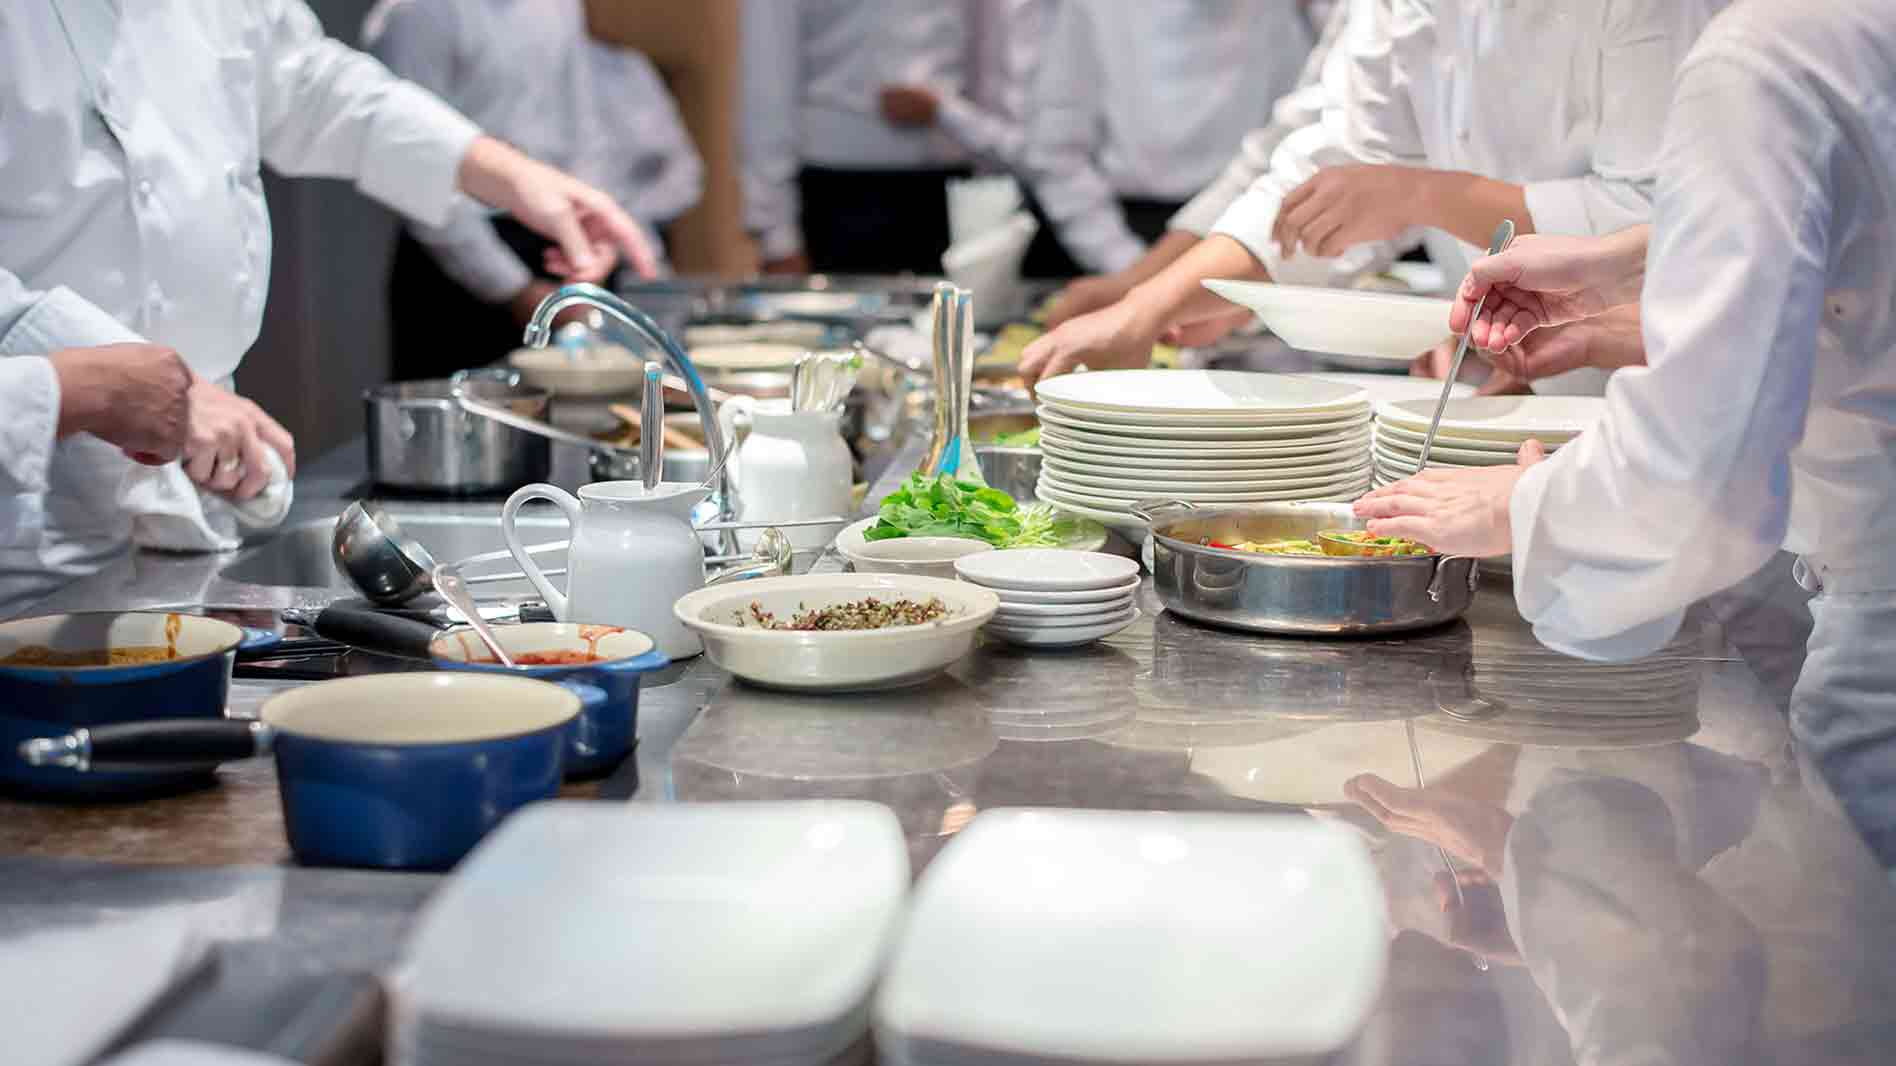 Are Kitchen Wages Killing the Industry?